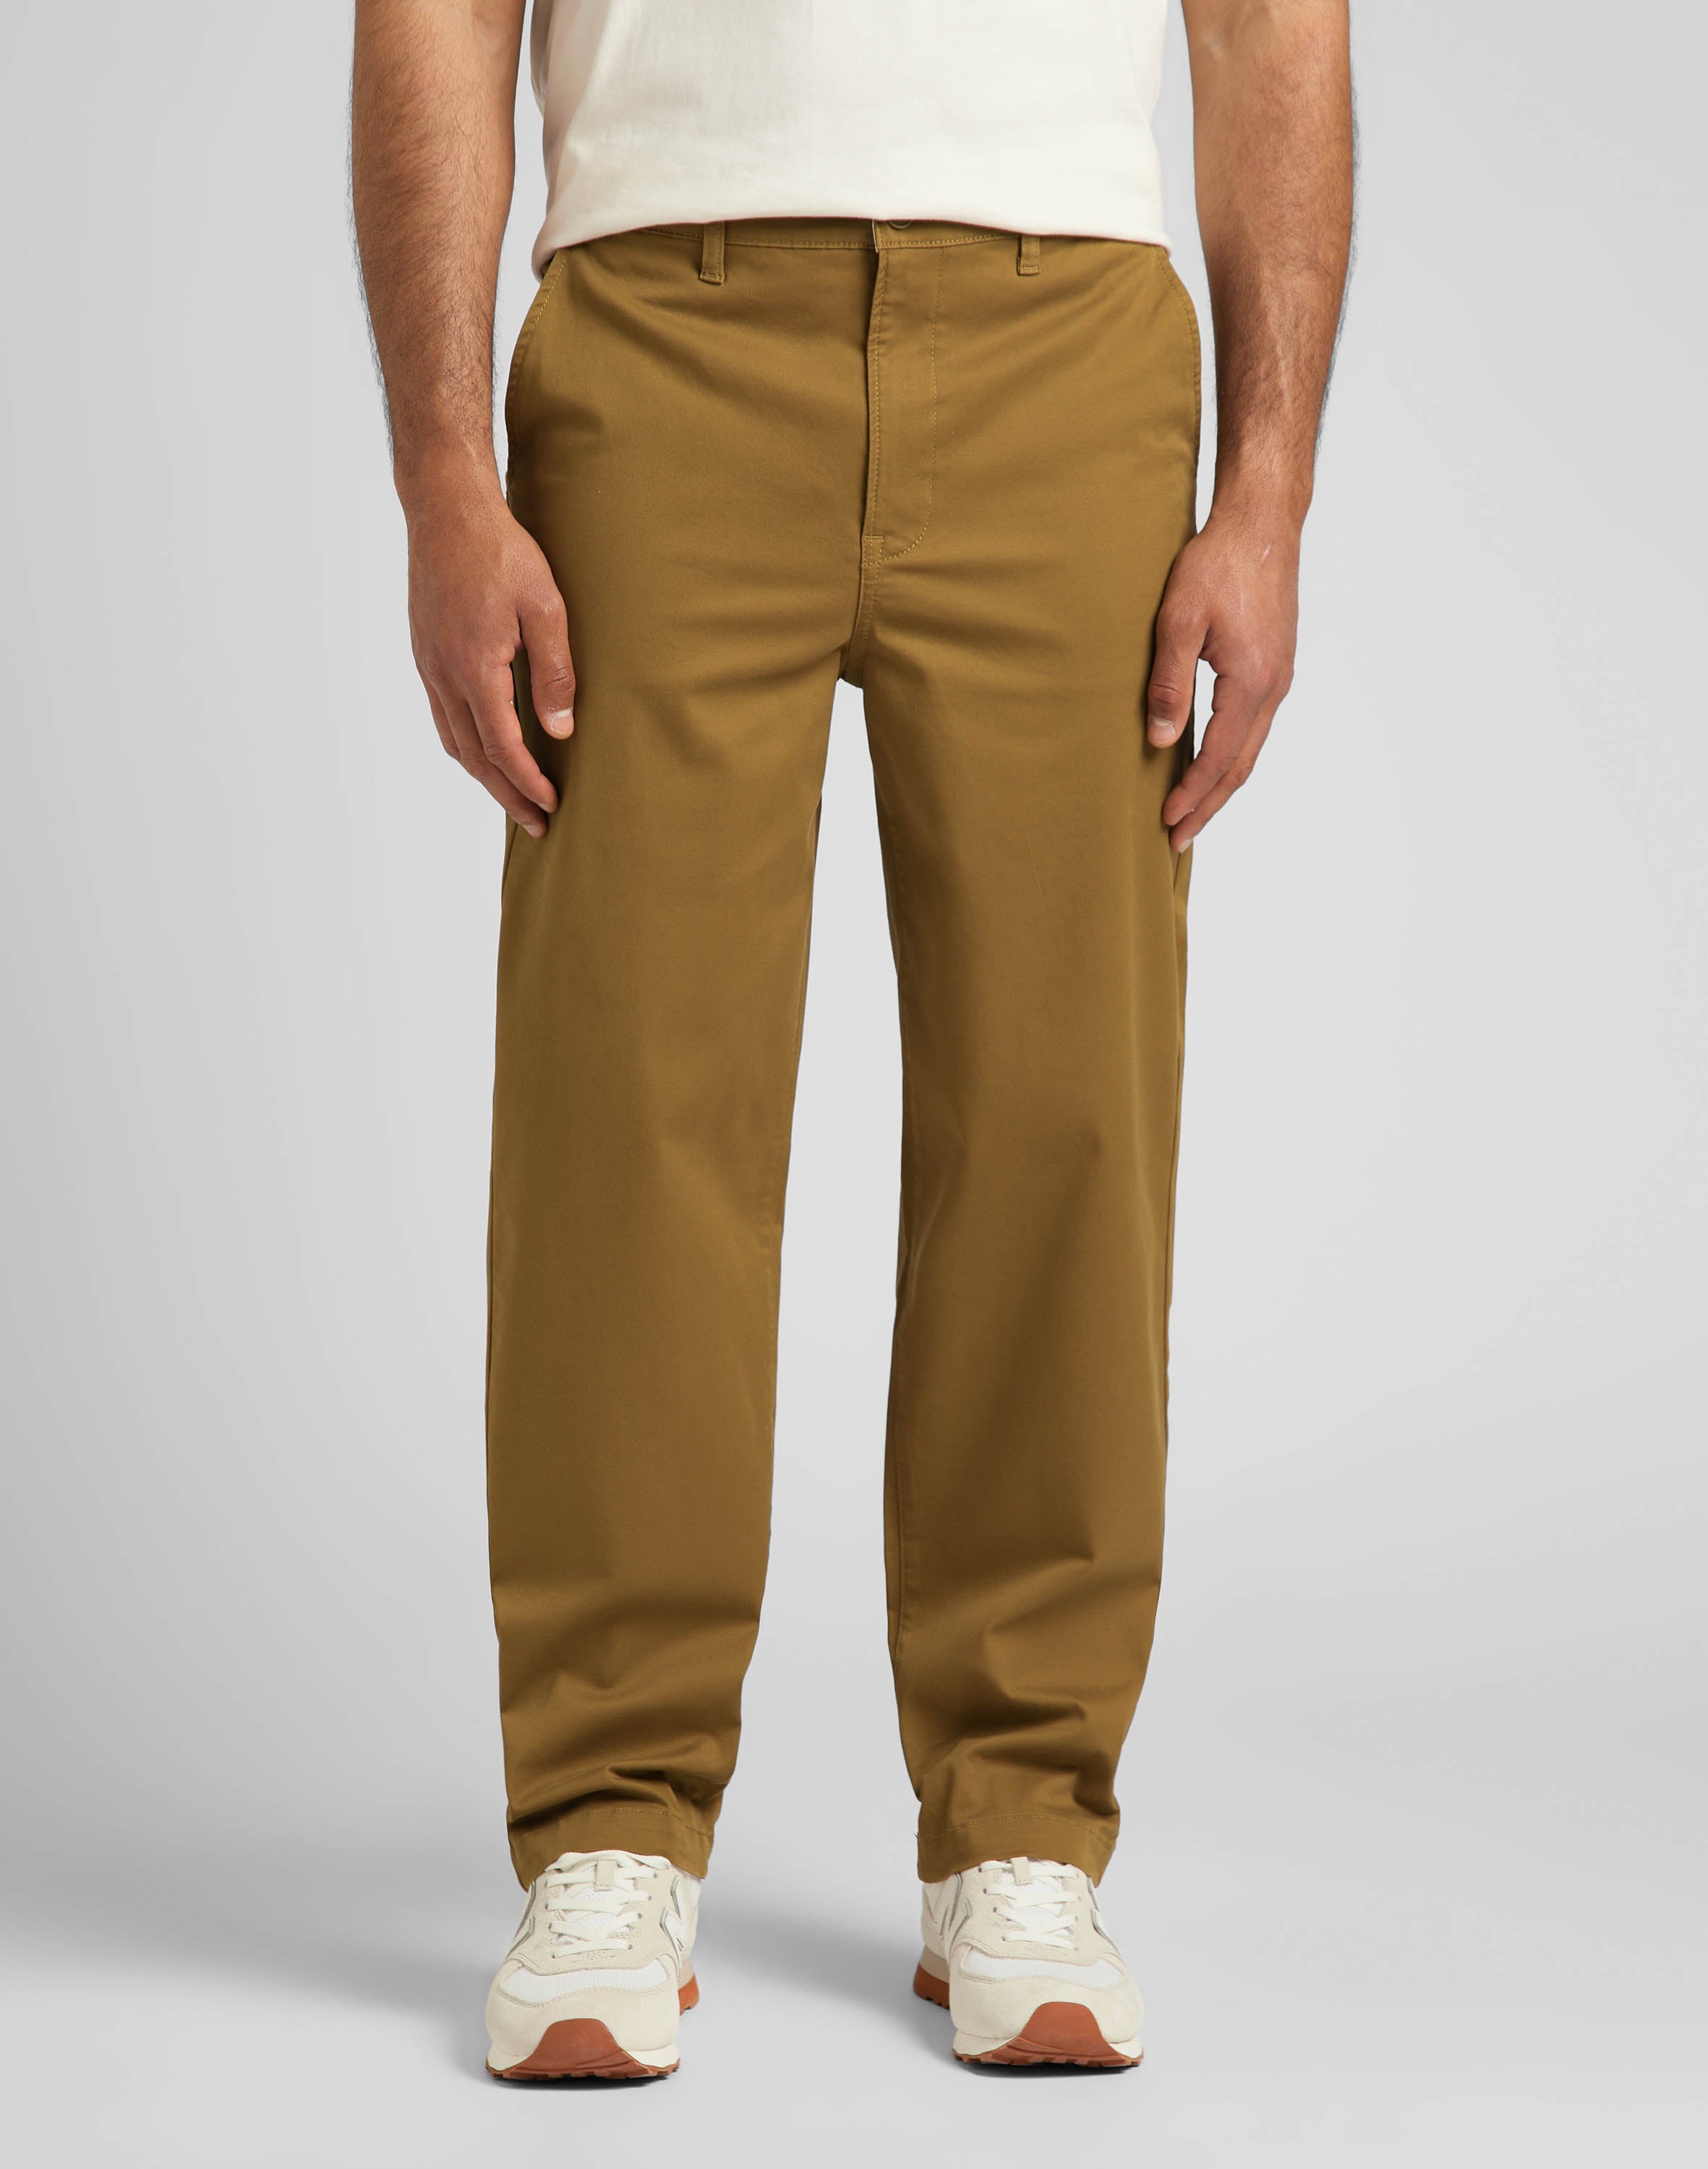 Relaxed Chino in Tumbleweed Chinos Lee   